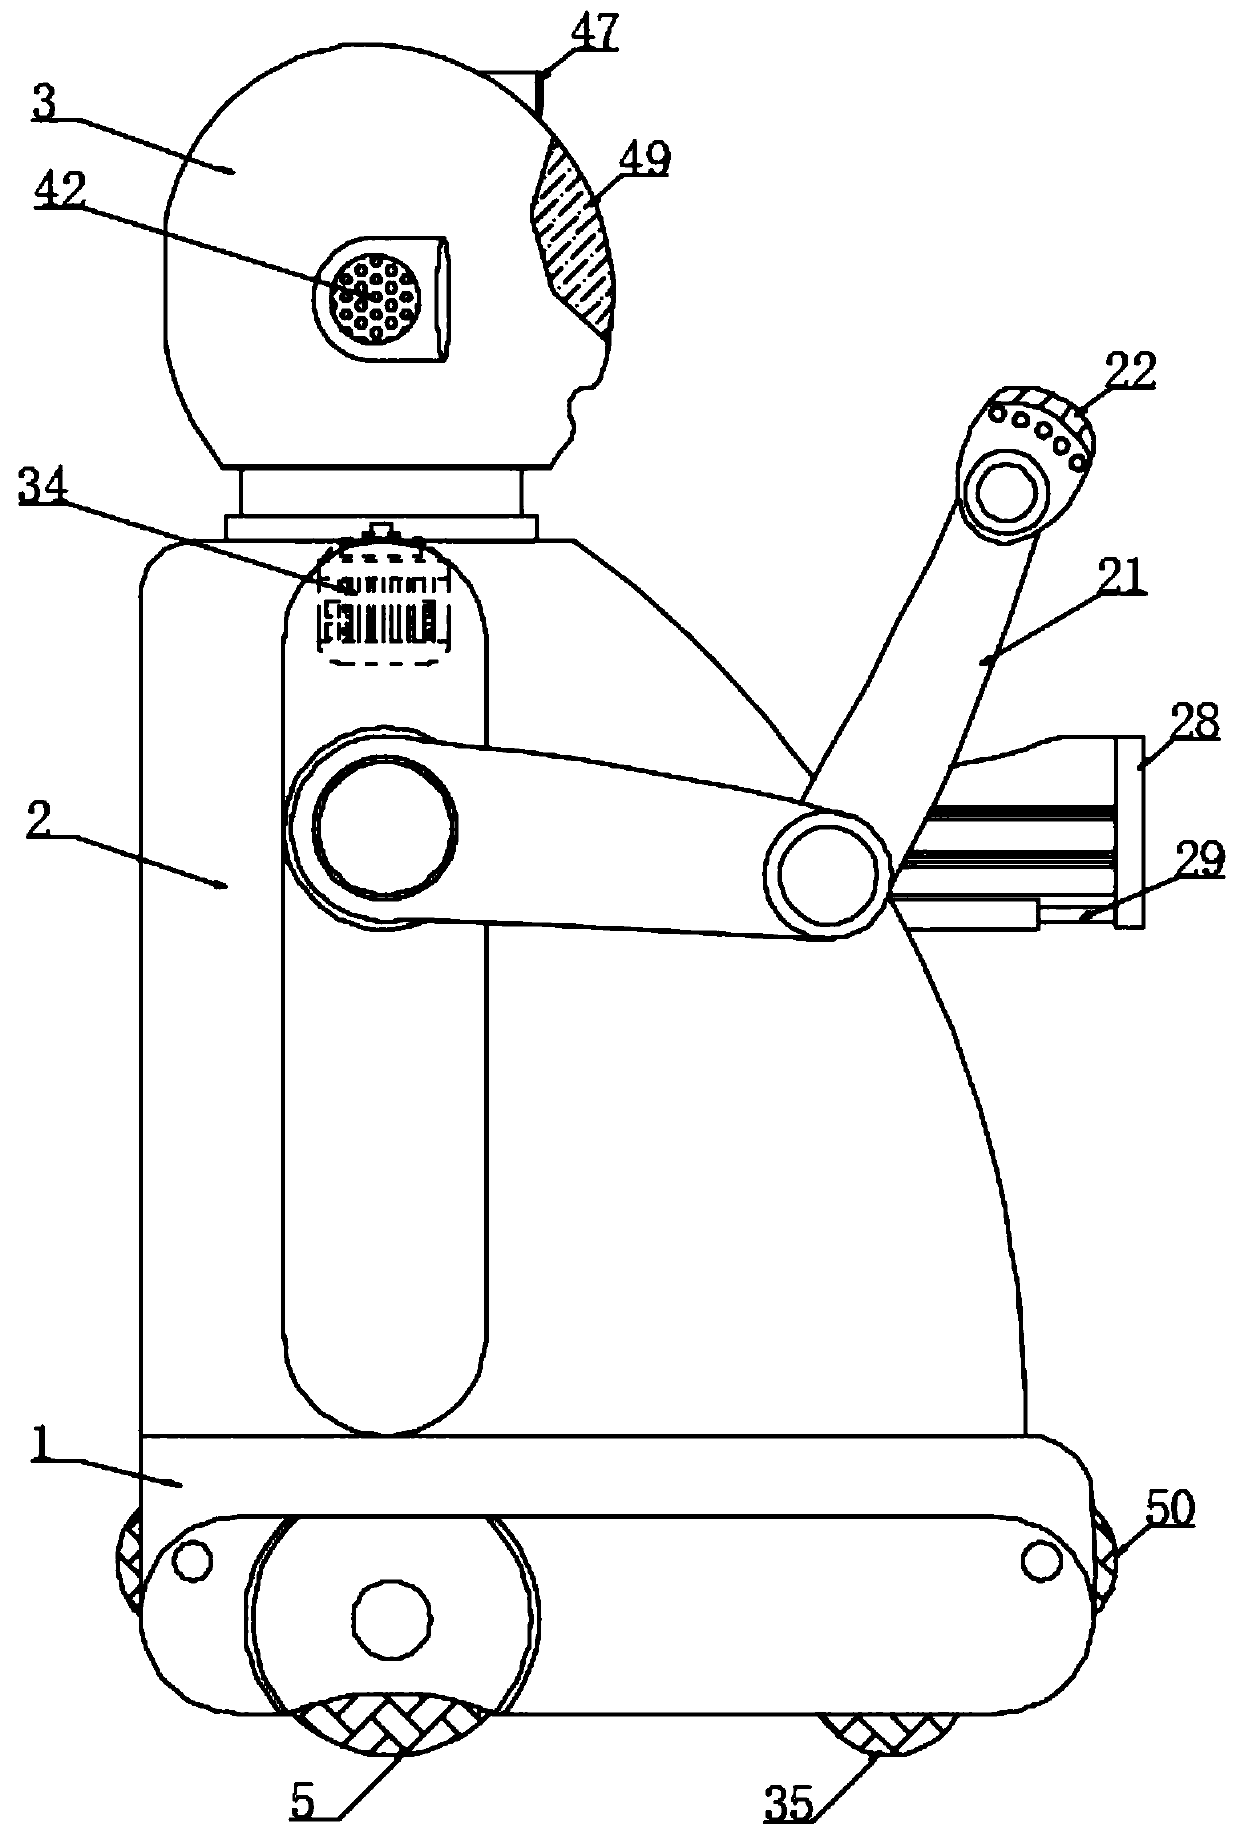 Service robot with motion control device